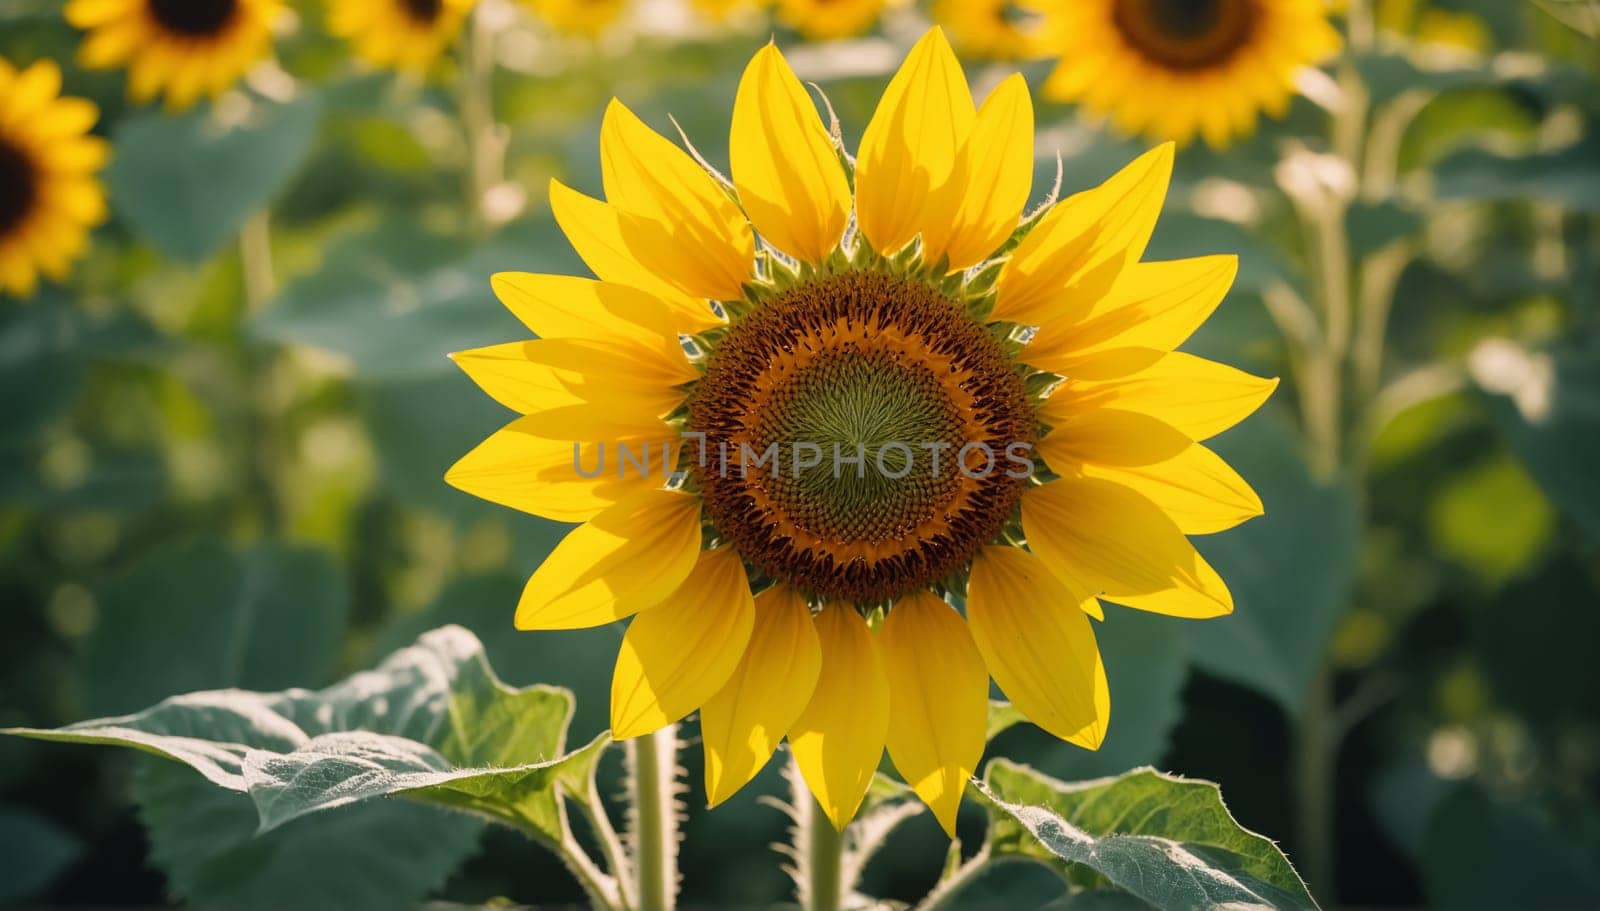 Sunflowers Turning Towards the Sun in a Lush Field by Andre1ns